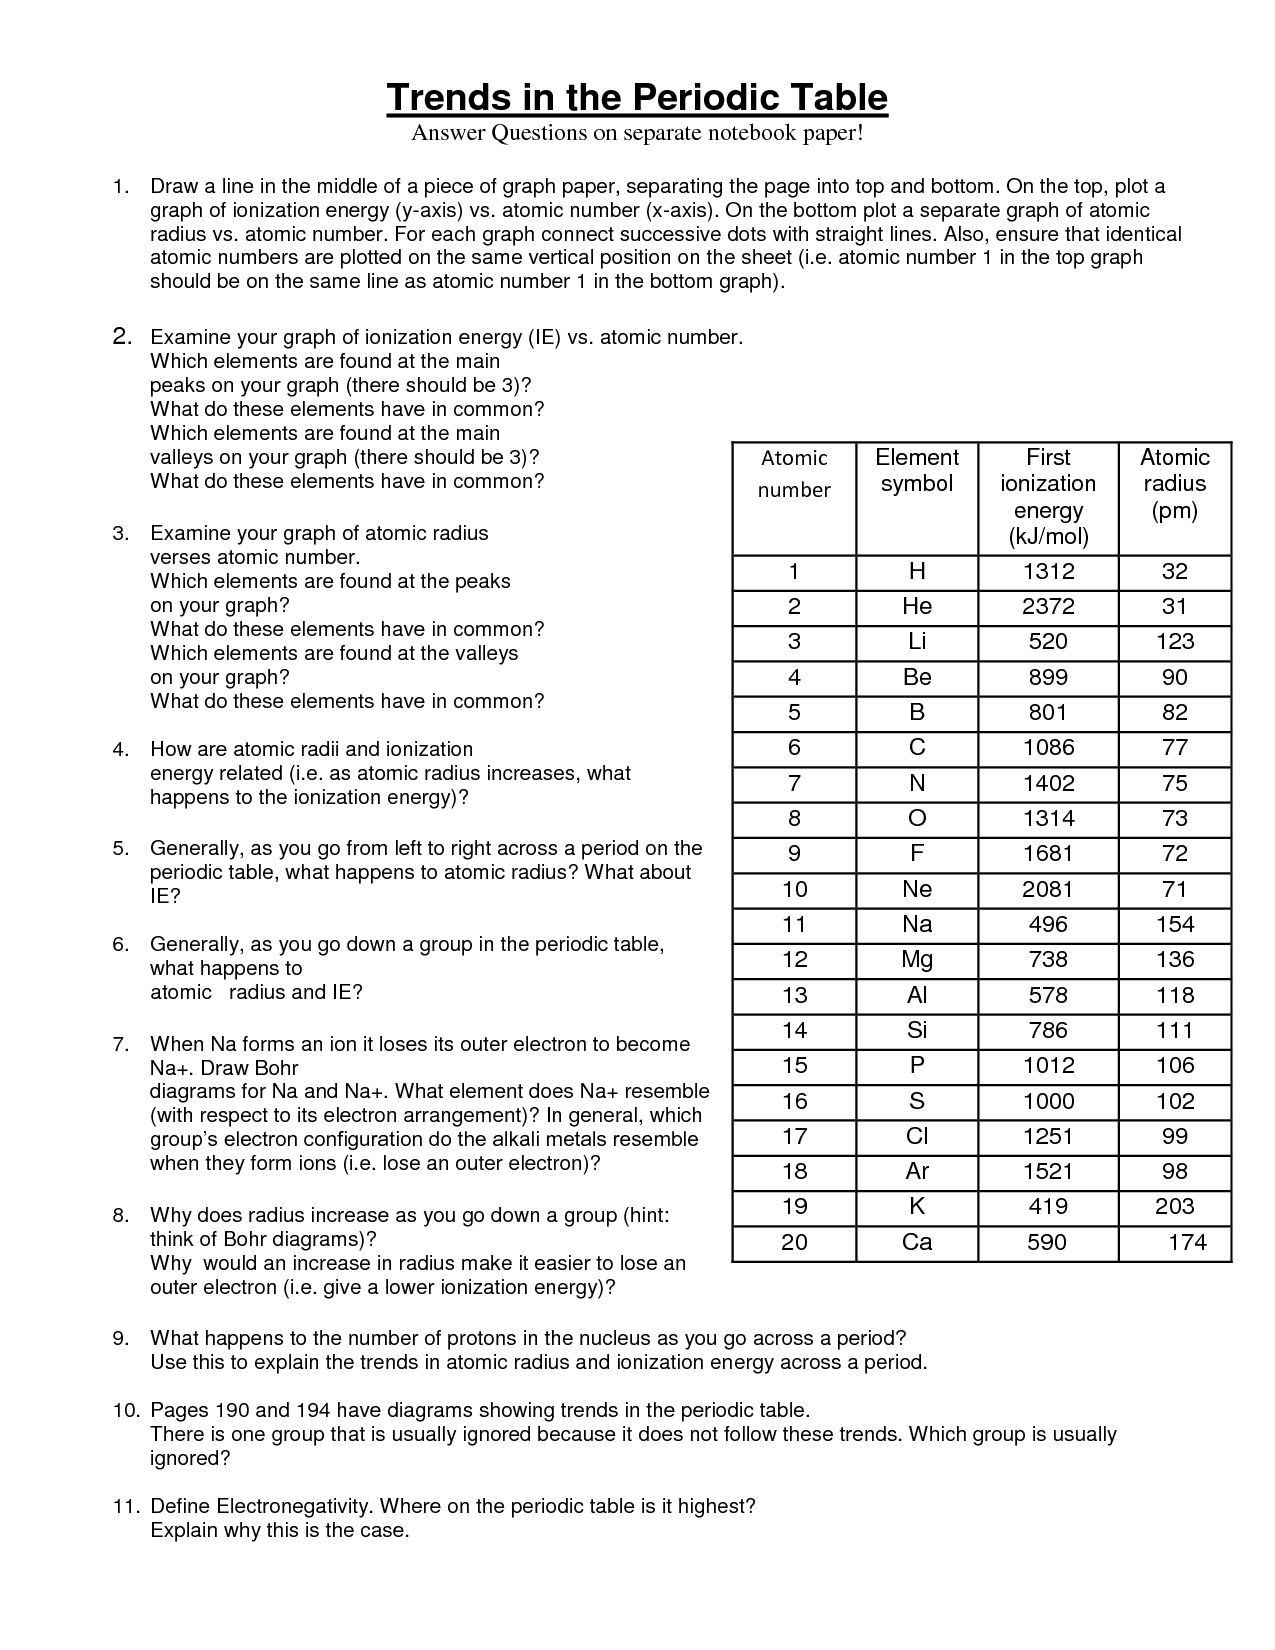 Trends Of The Periodic Table Worksheet Part 1